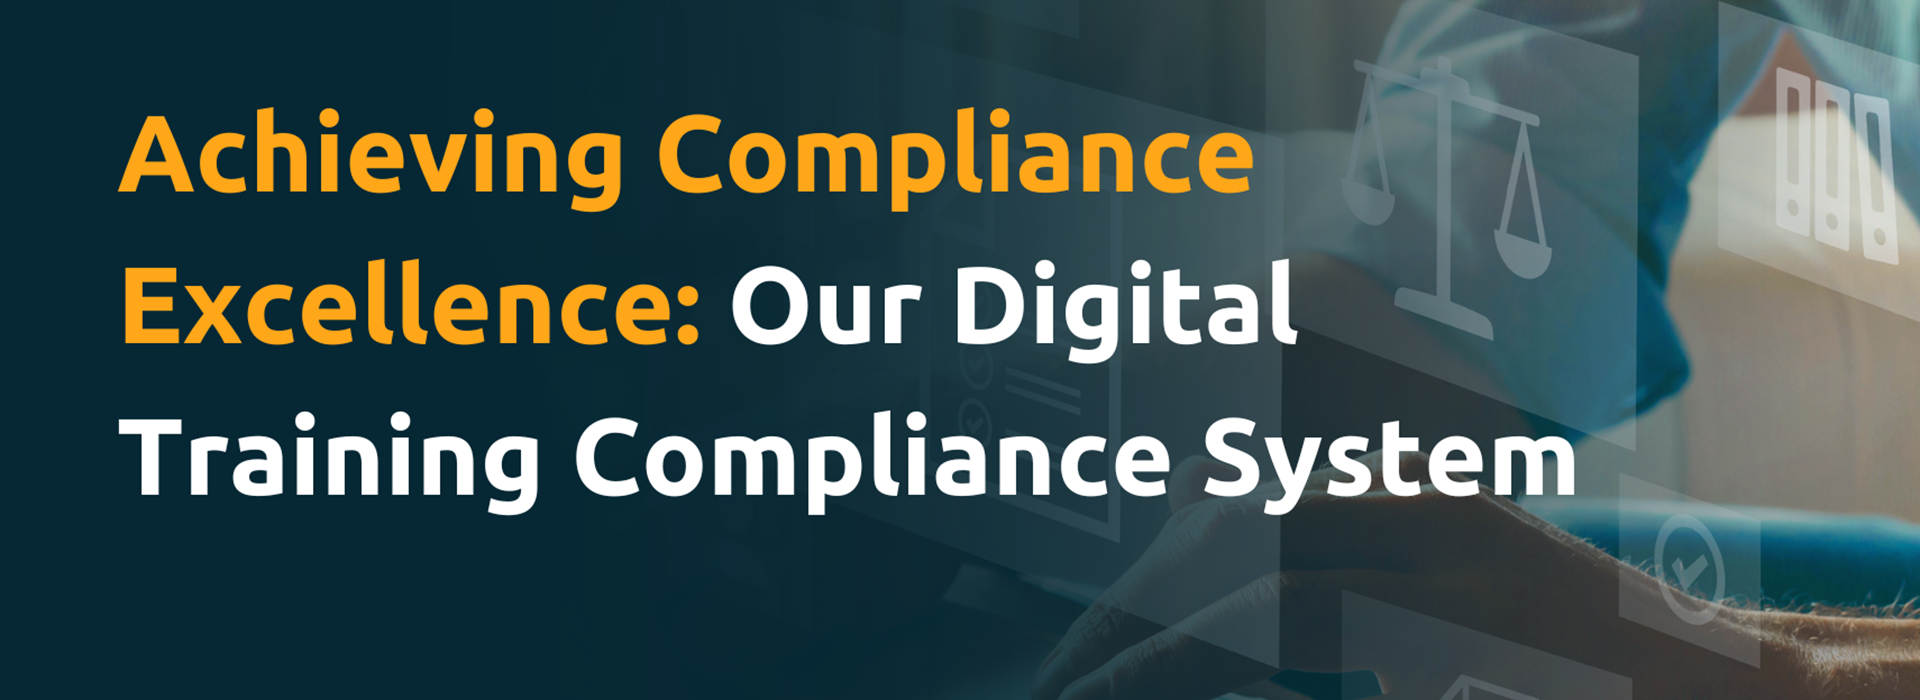 Achieving Compliance Excellence Our Digital Training Compliance System Article Thumbnail